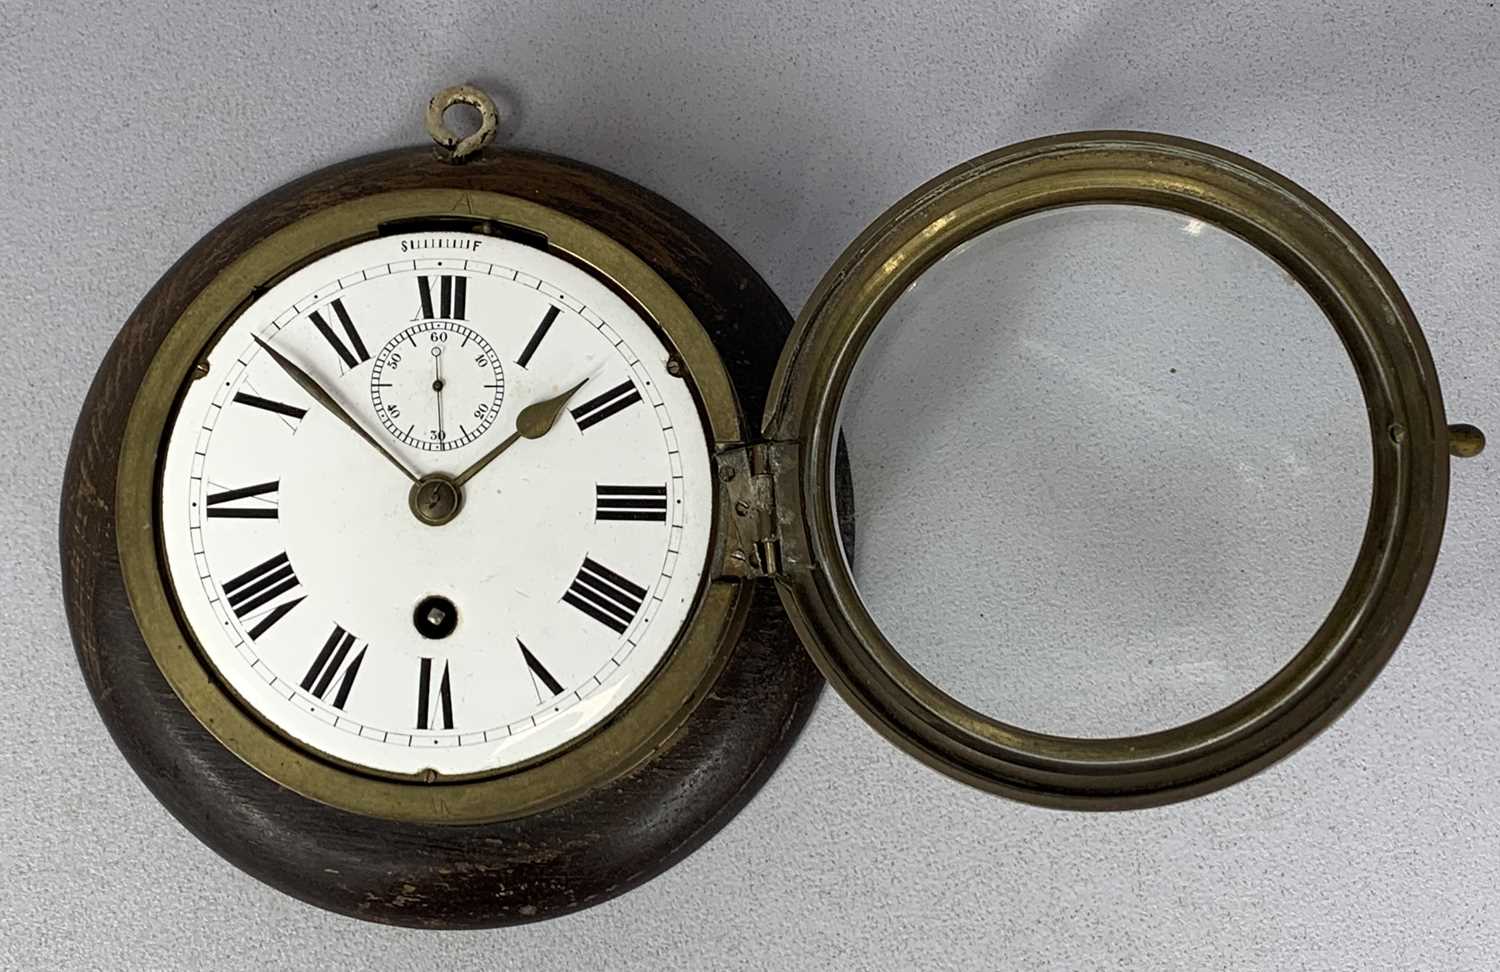 BRASS CASED SHIPS BULKHEAD CLOCK, mounted on an oak board, the white enamel dial with Roman numerals - Image 2 of 3